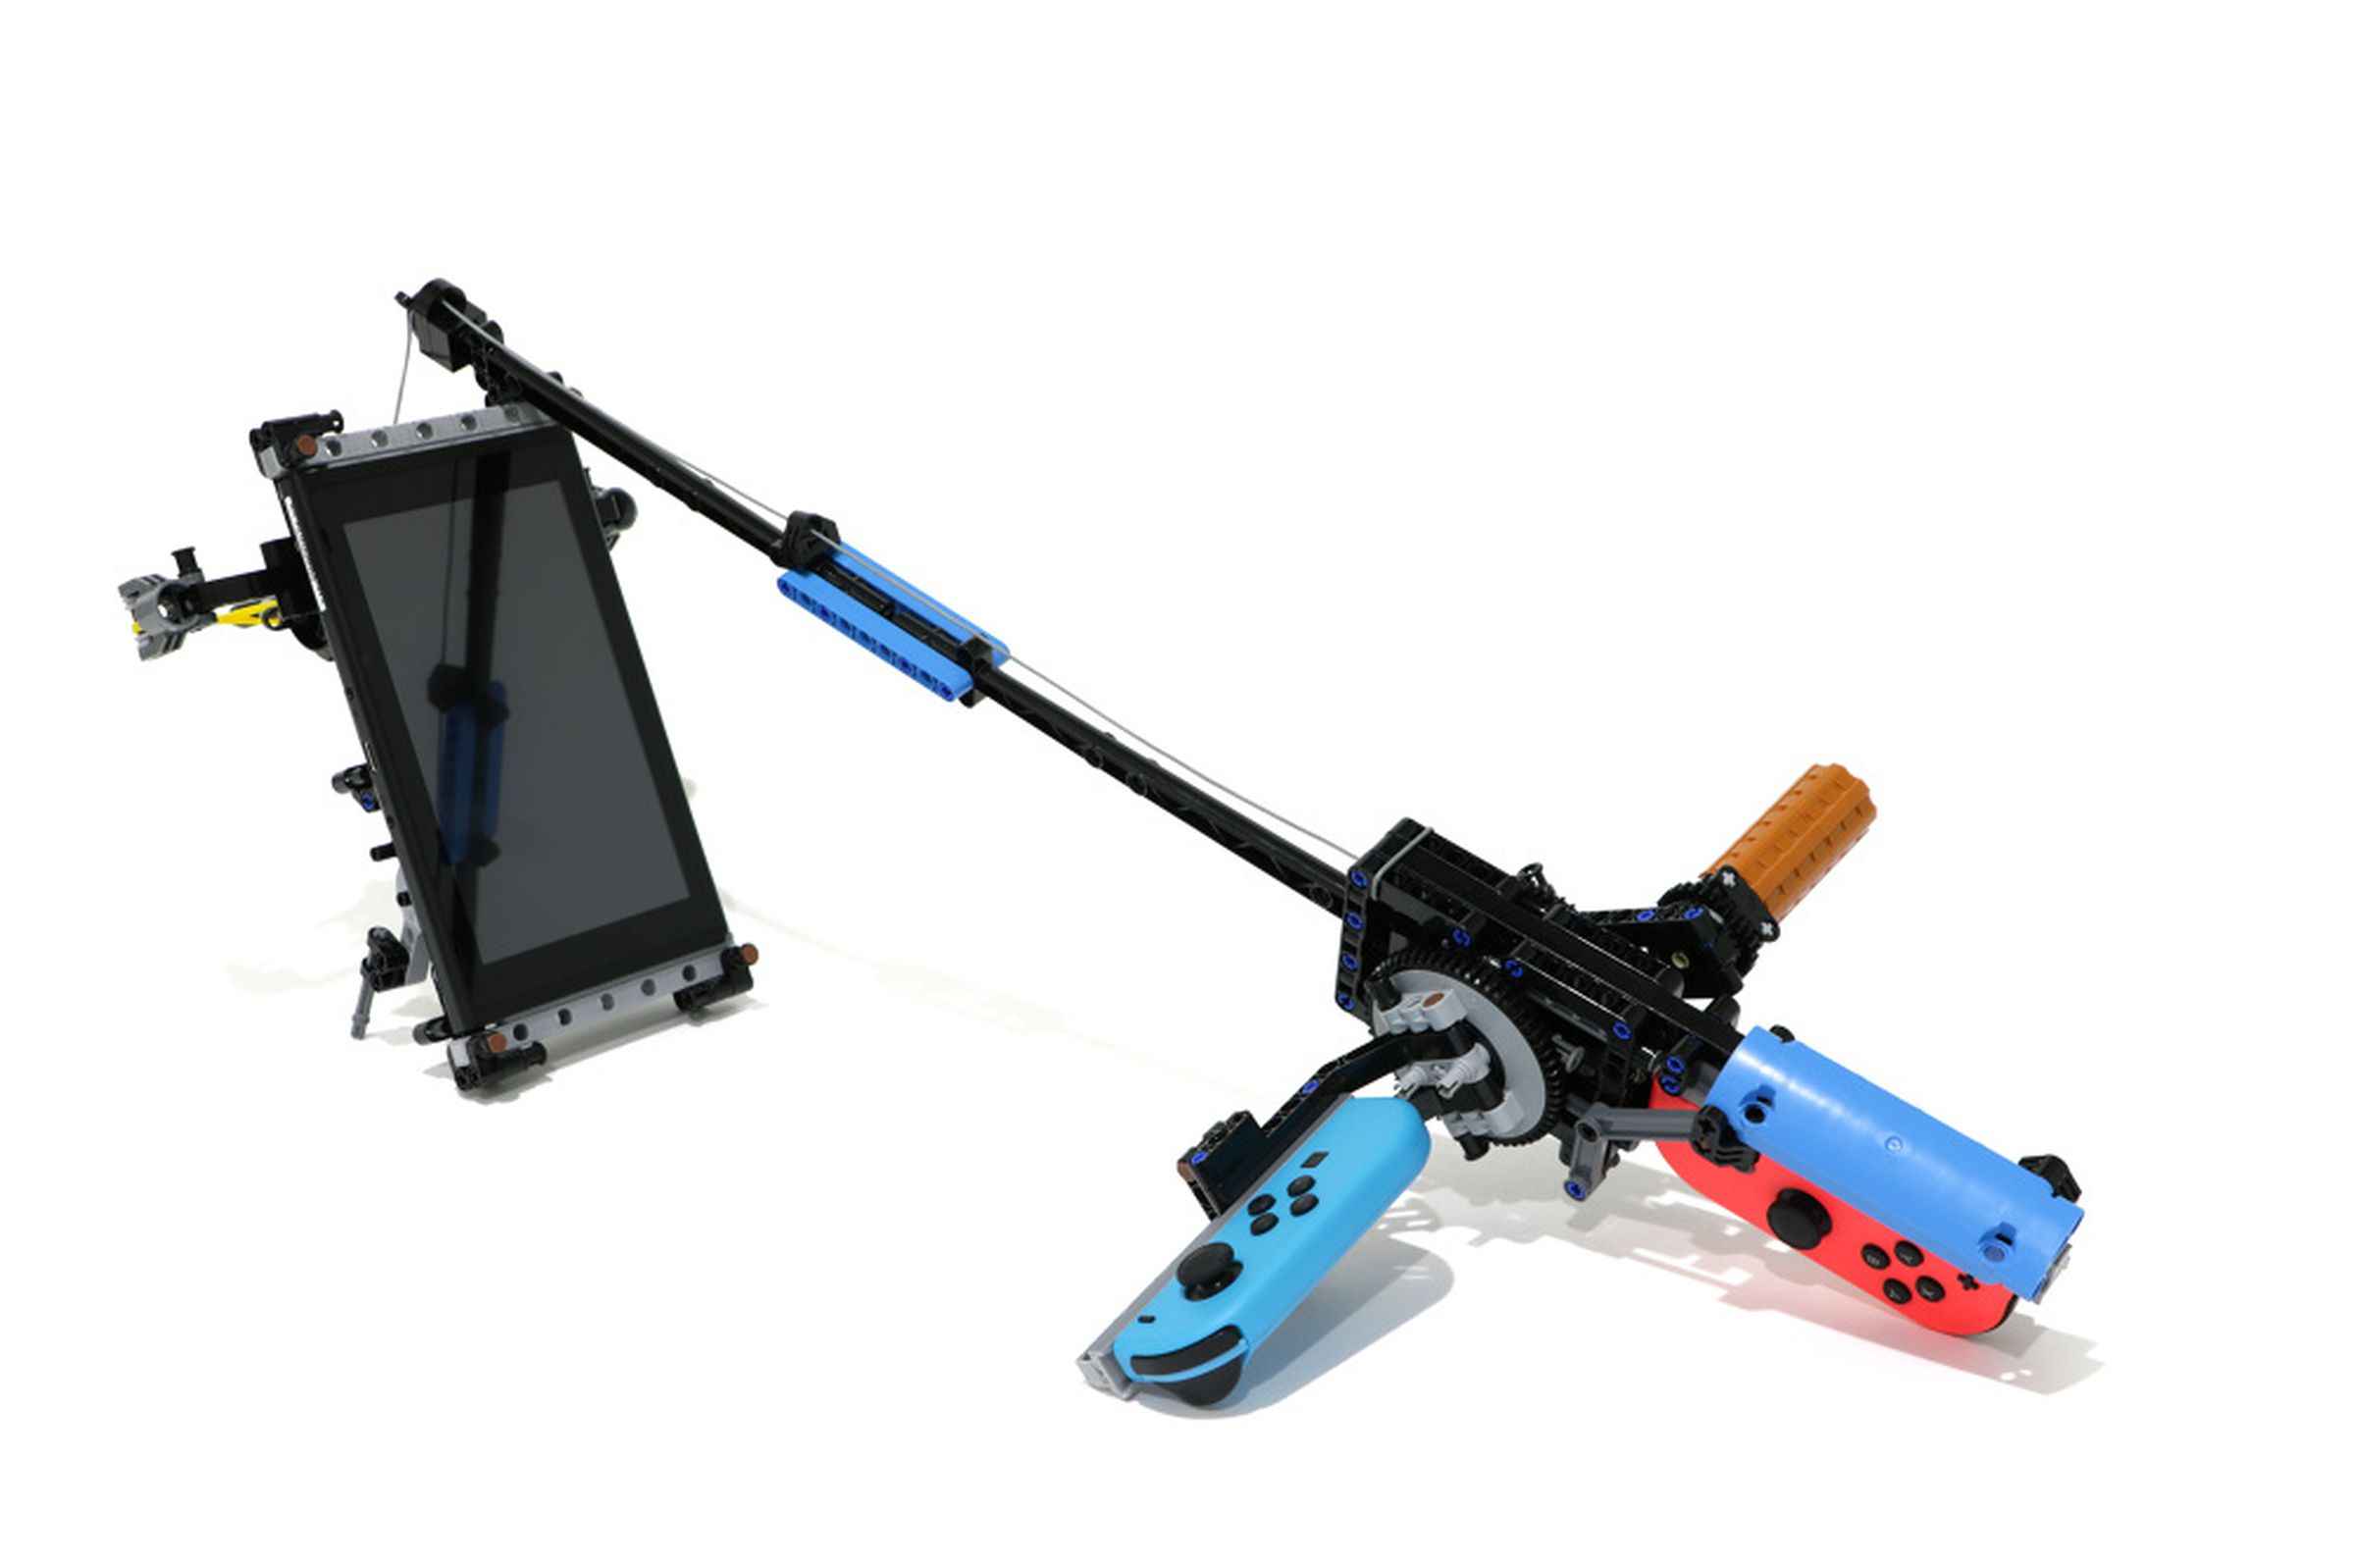 The fishing rod remade with Lego.